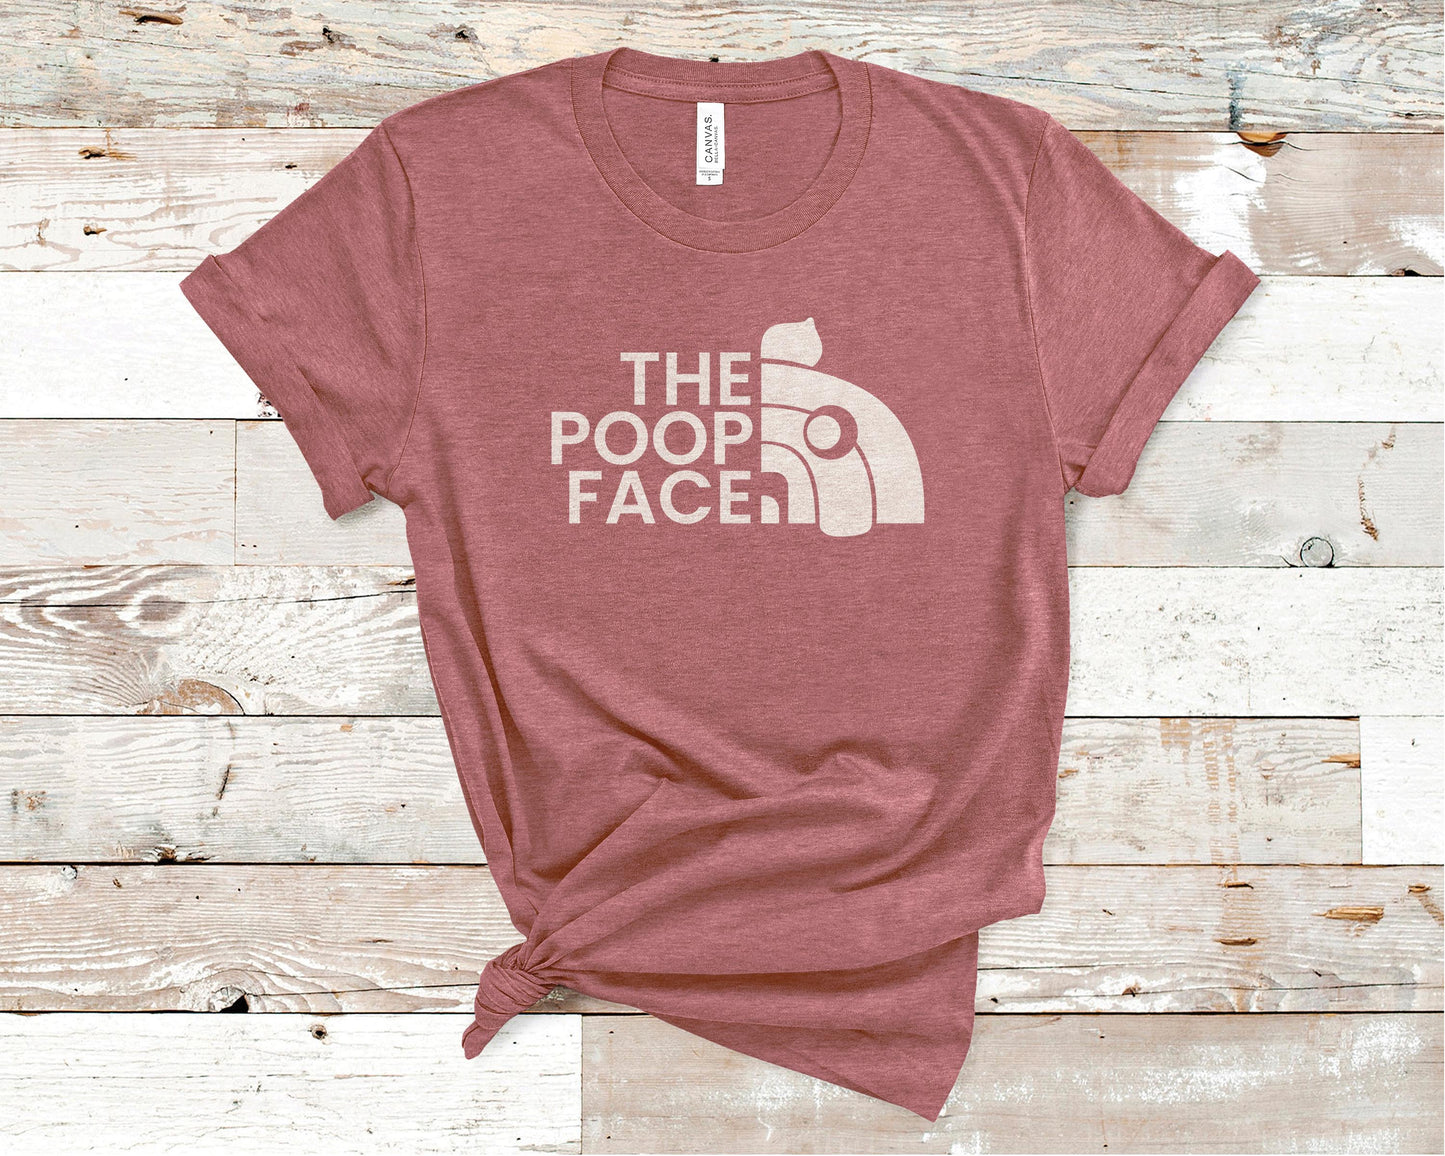 The Poop Face - Funny/ Sarcastic